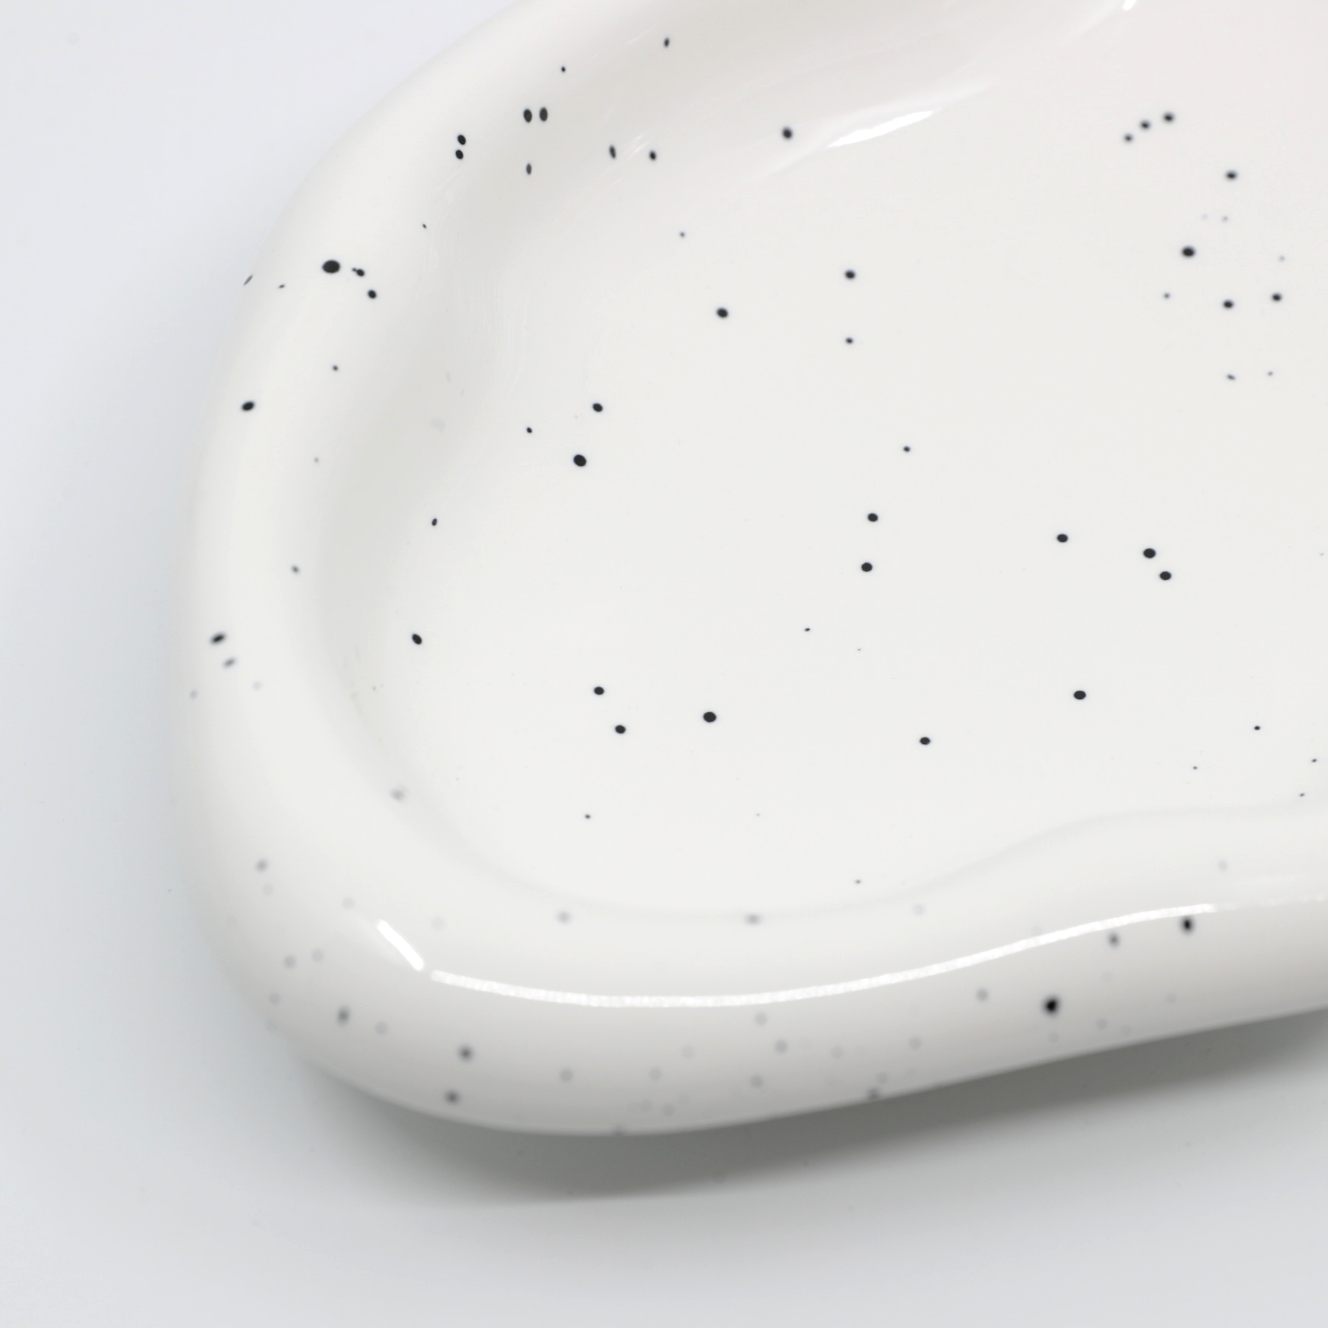 Warbled Ceramic - Large Speckled Bowl - The Feelter